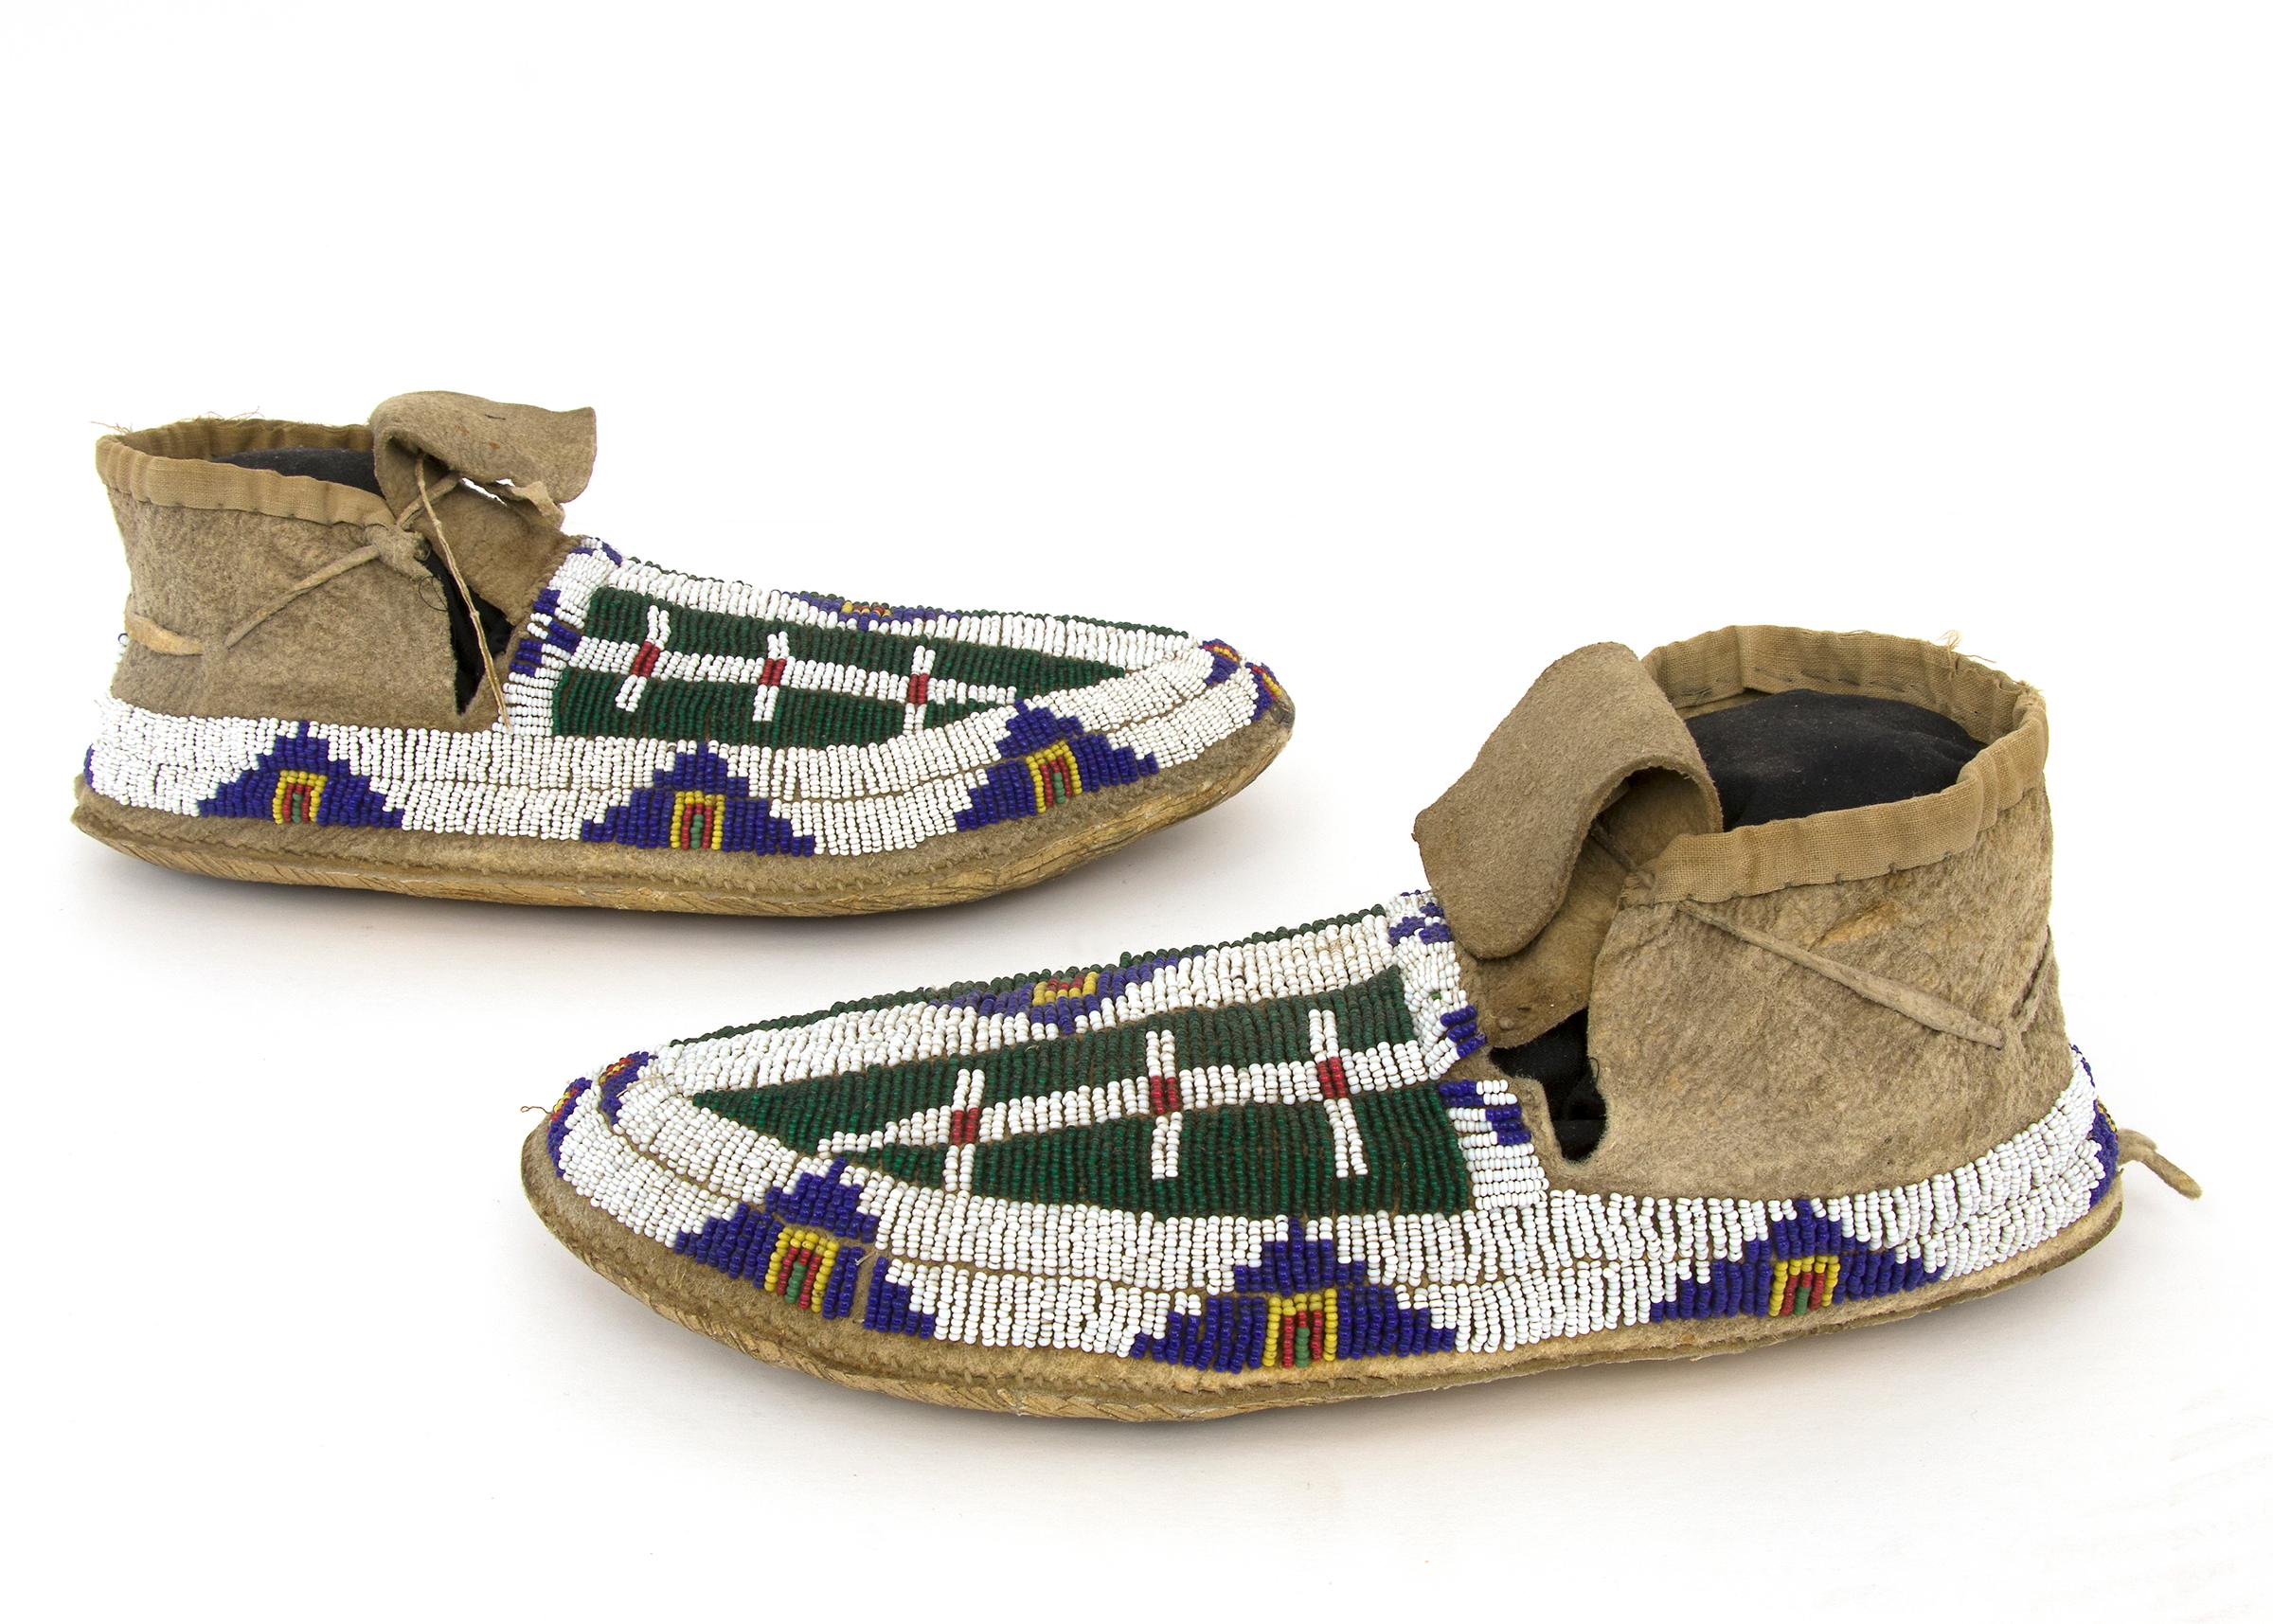 This pair of 19th century antique moccasins date to circa 1880 and are constructed of native tanned hide and sewn with glass trade beads in colors of green, white, red, blue and yellow. The primary design element of these moccasins are intricate